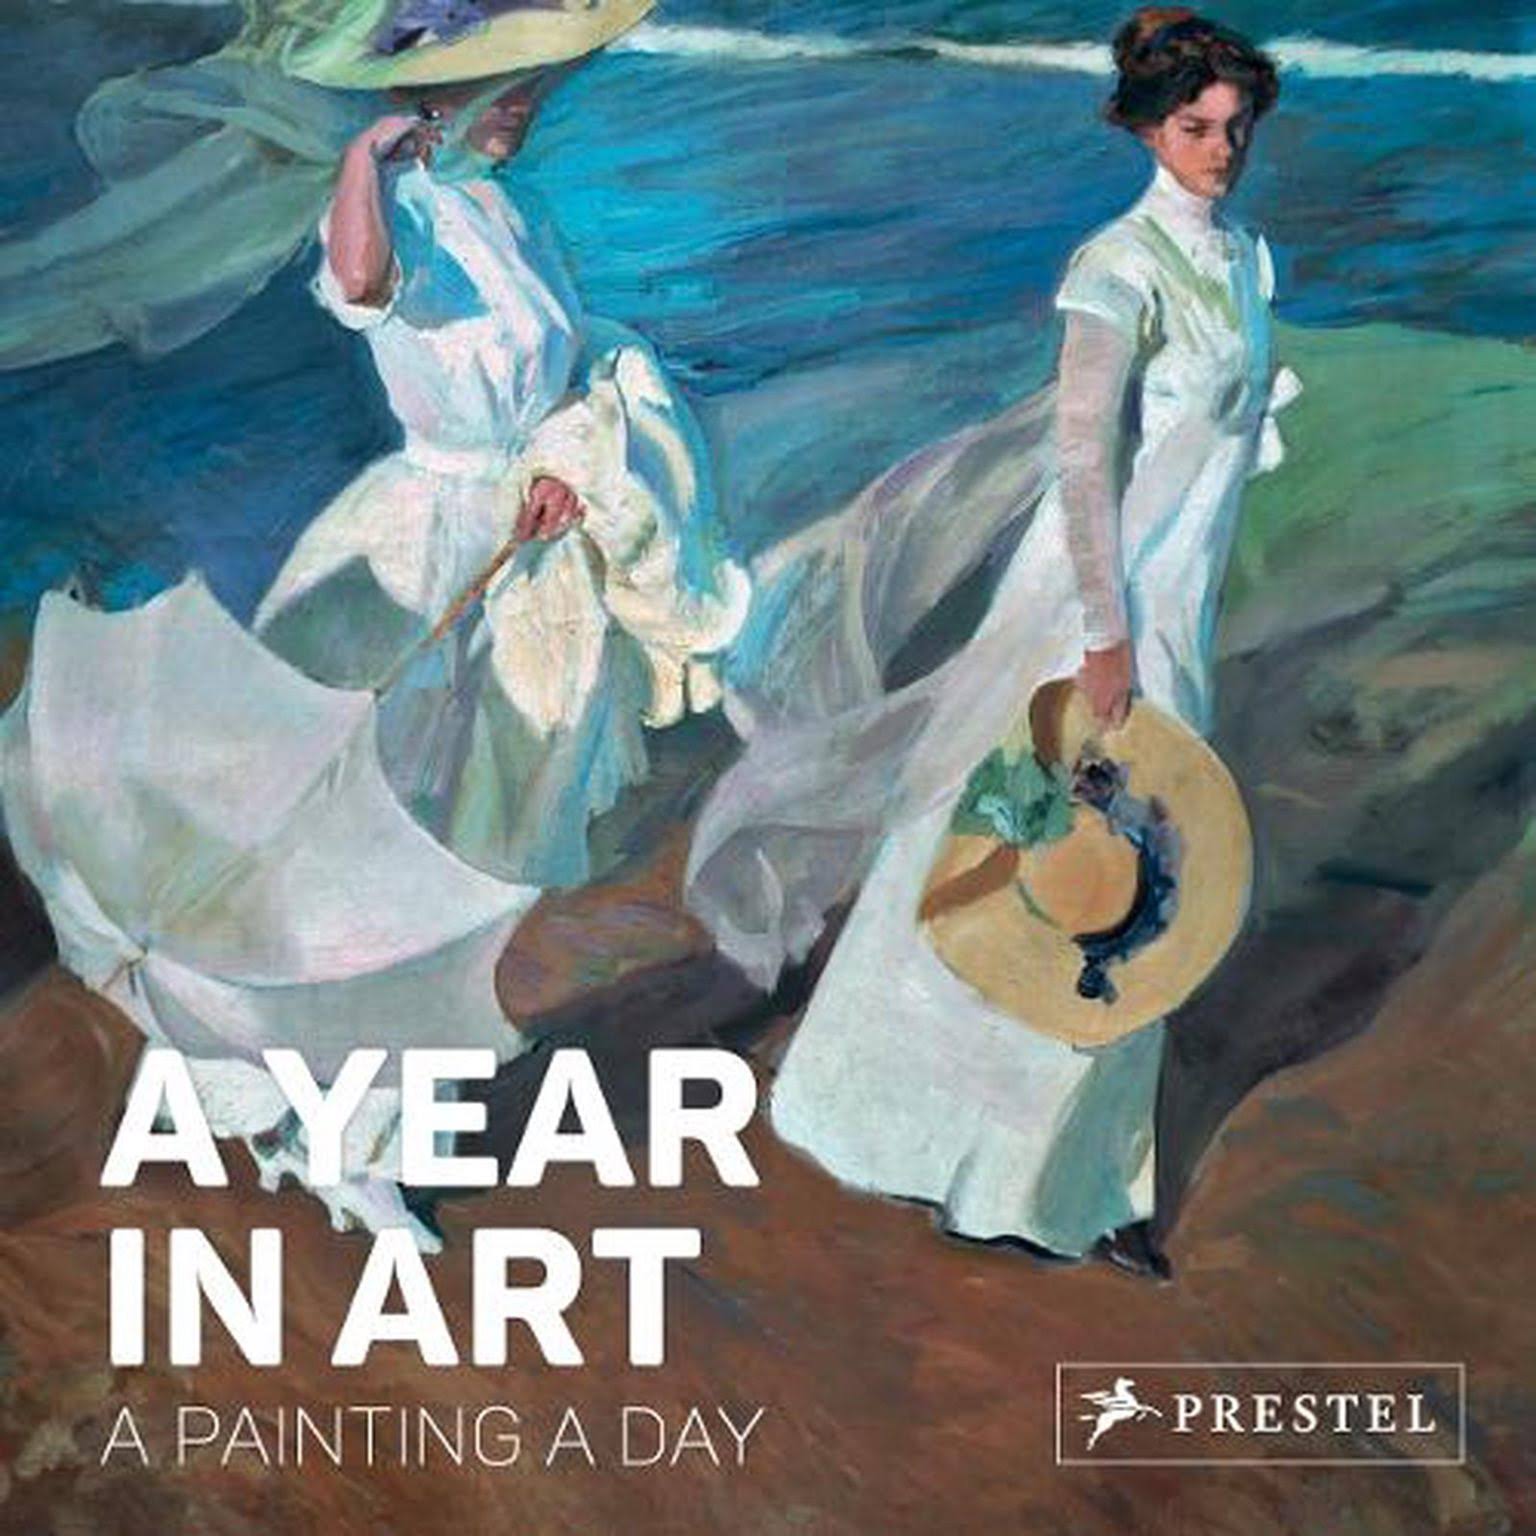 A Year in Art: A Painting A Day [Book]